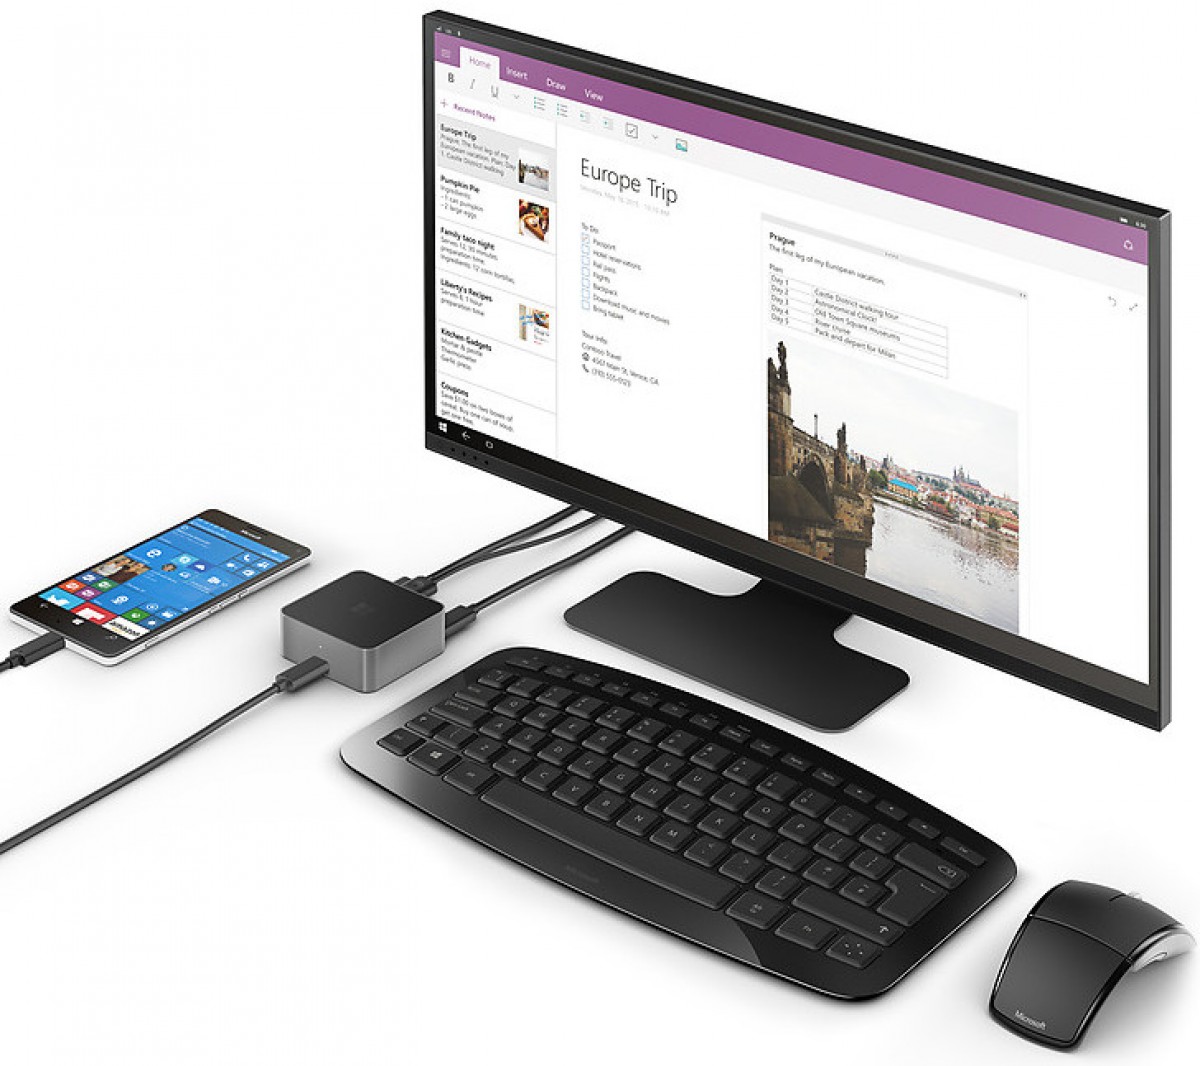 A Microsoft Lumia 950 with the Display Dock running Continuum